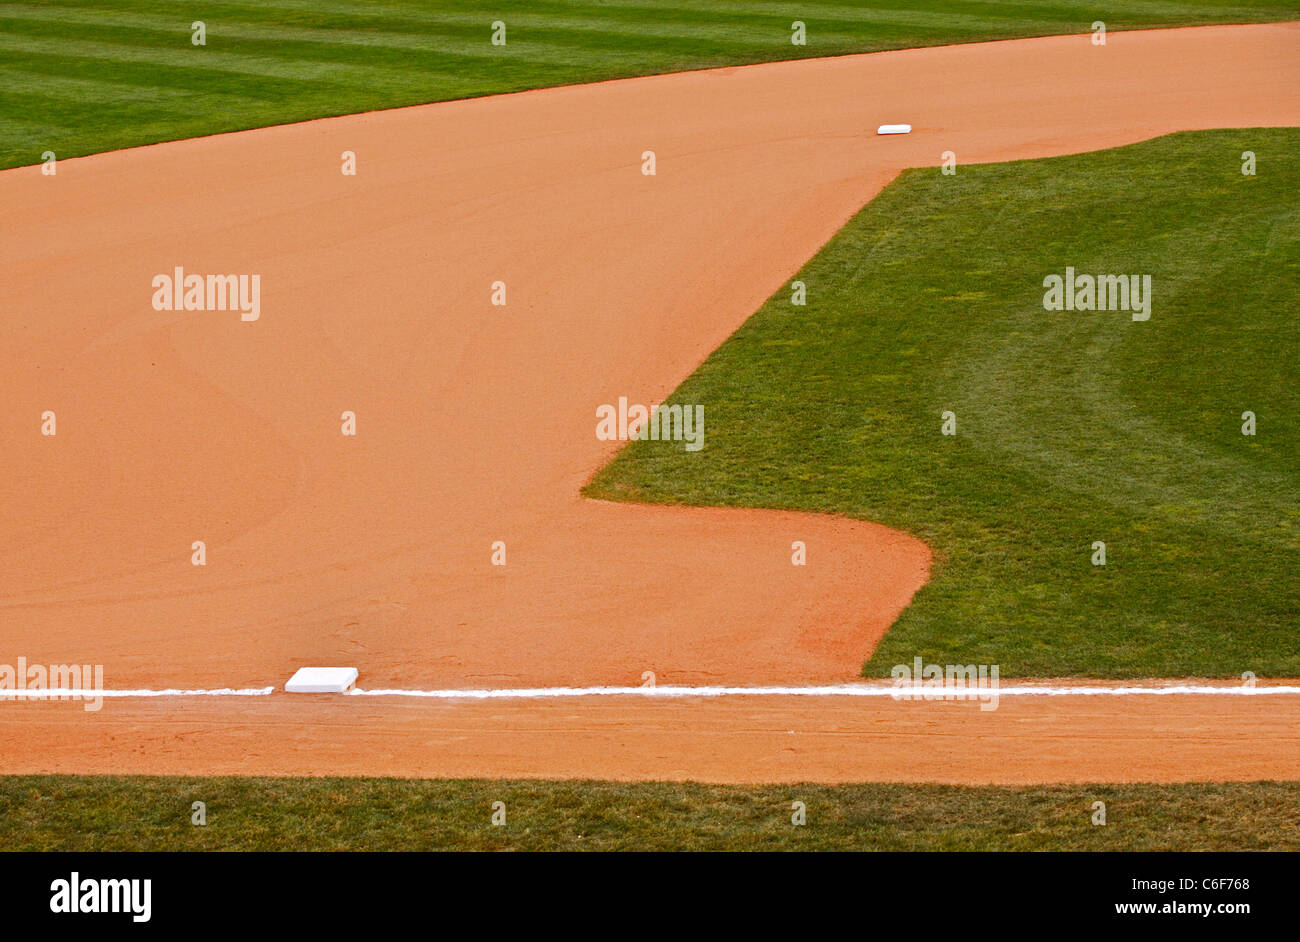 A portion of an baseball park's dirt and grass infield showing second and third bases. Stock Photo